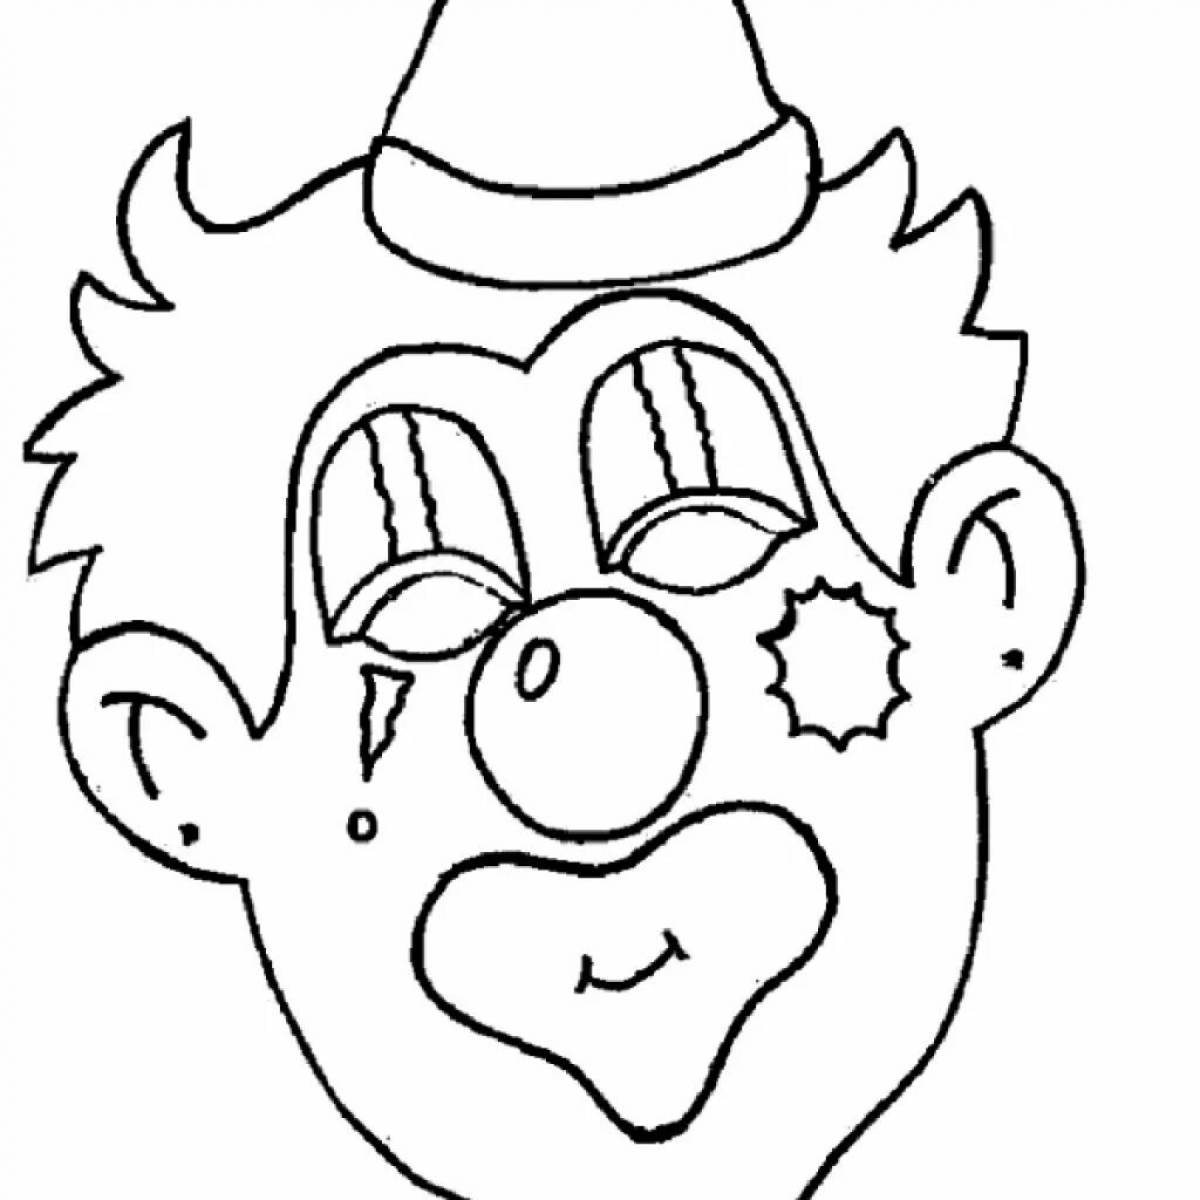 Glittering clown mask coloring page